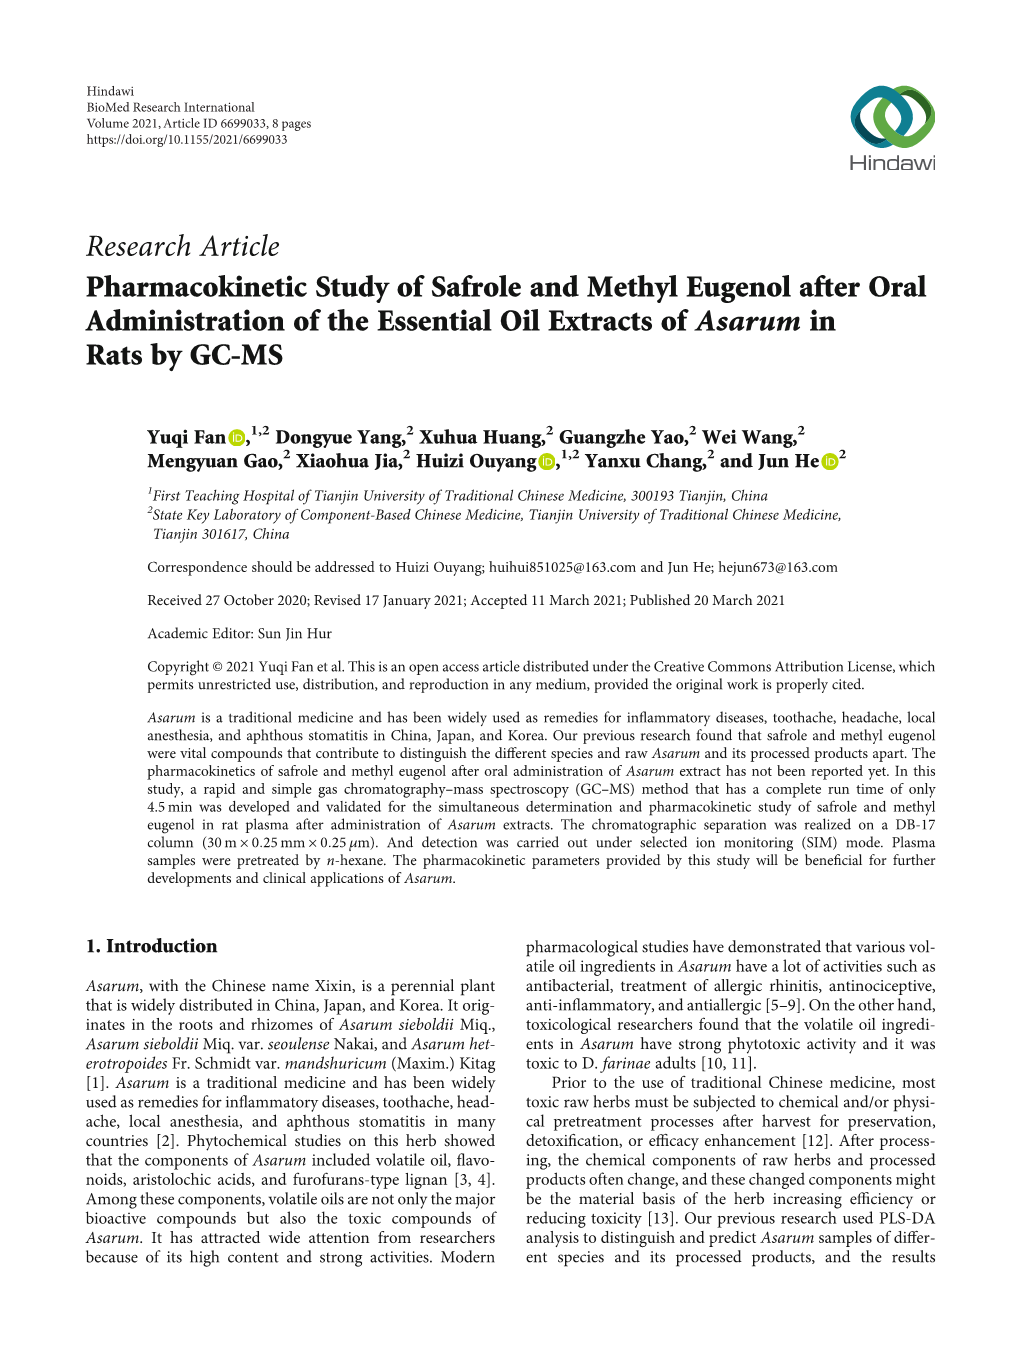 Pharmacokinetic Study of Safrole and Methyl Eugenol After Oral Administration of the Essential Oil Extracts of Asarum in Rats by GC-MS